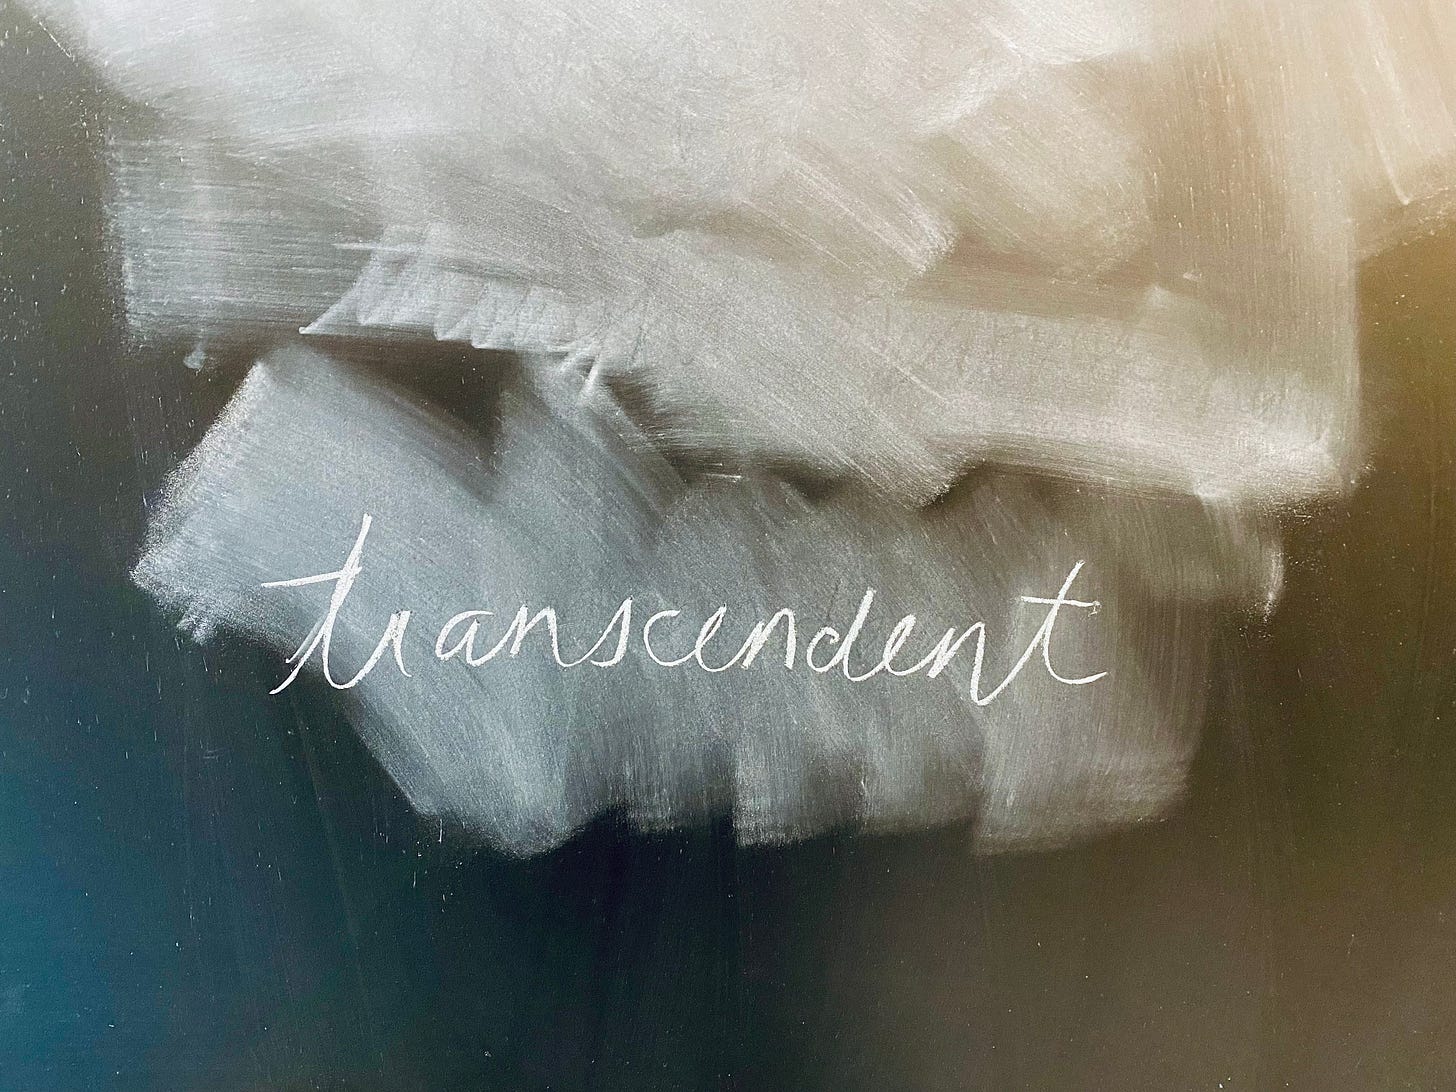 A chalkboard, erased except for the word ‘transcendent’ written in script